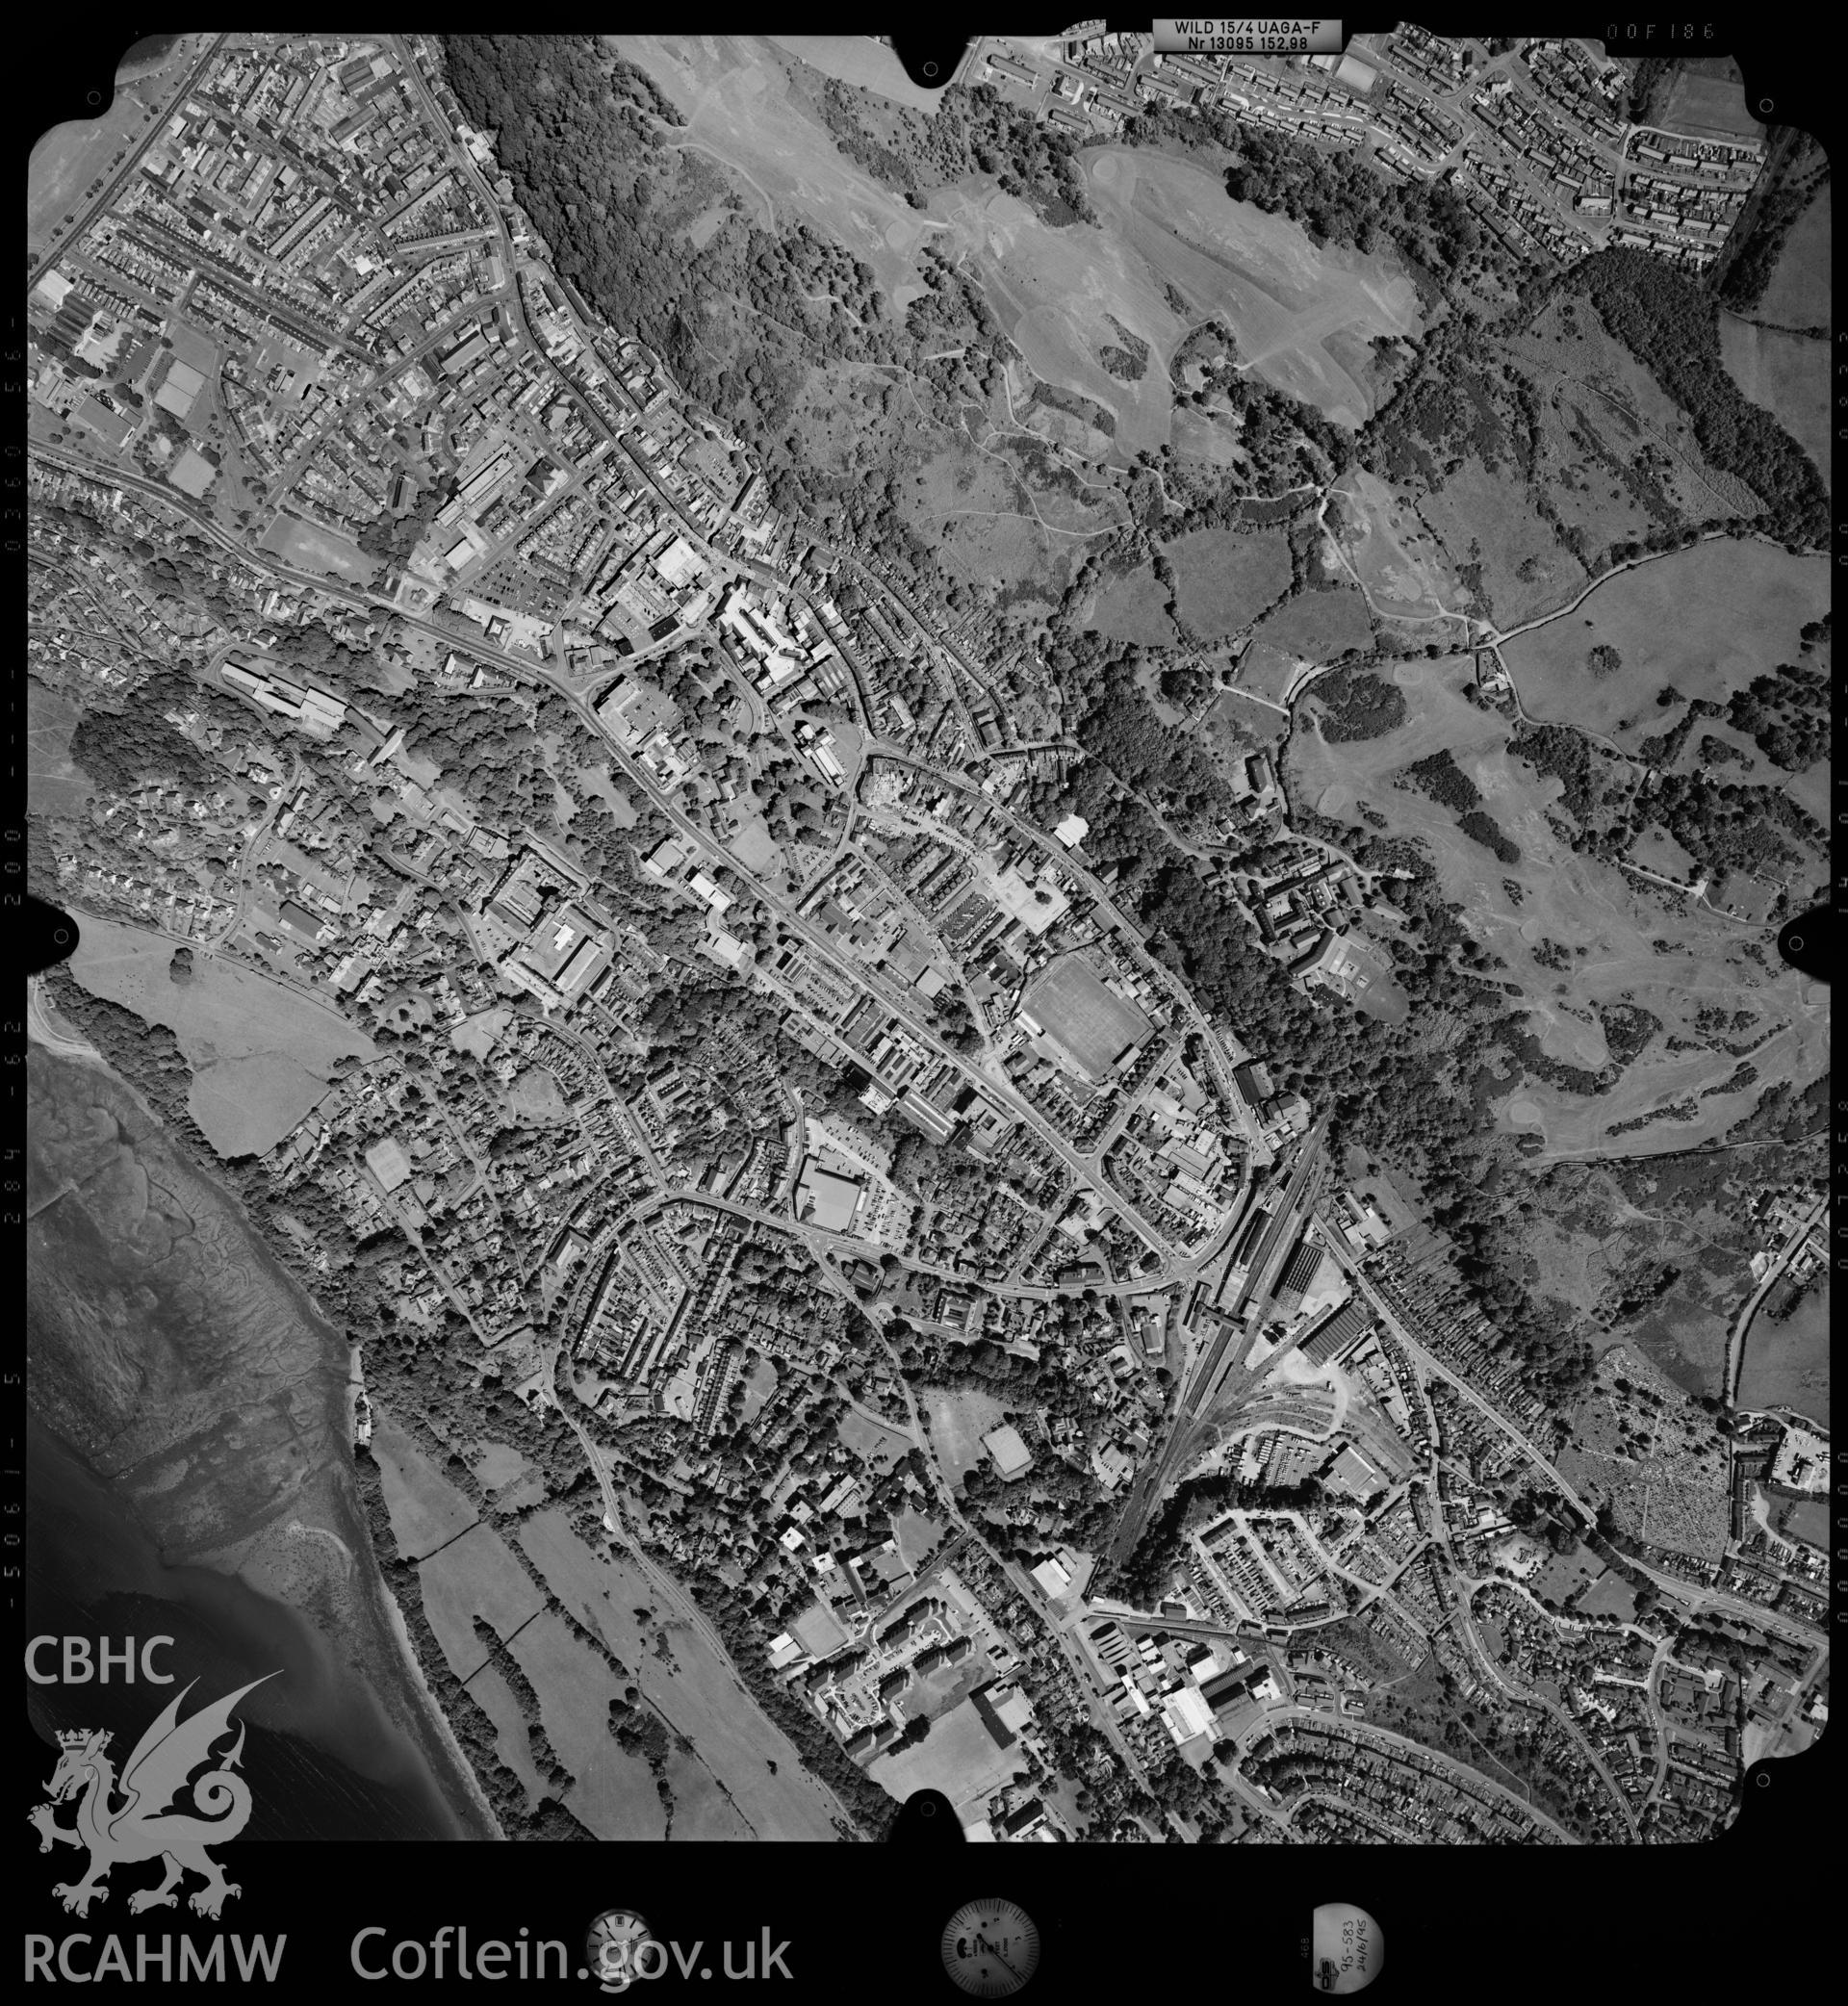 Digitized copy of an aerial photograph showing Upper Bangor area, taken by Ordnance Survey, 1995.